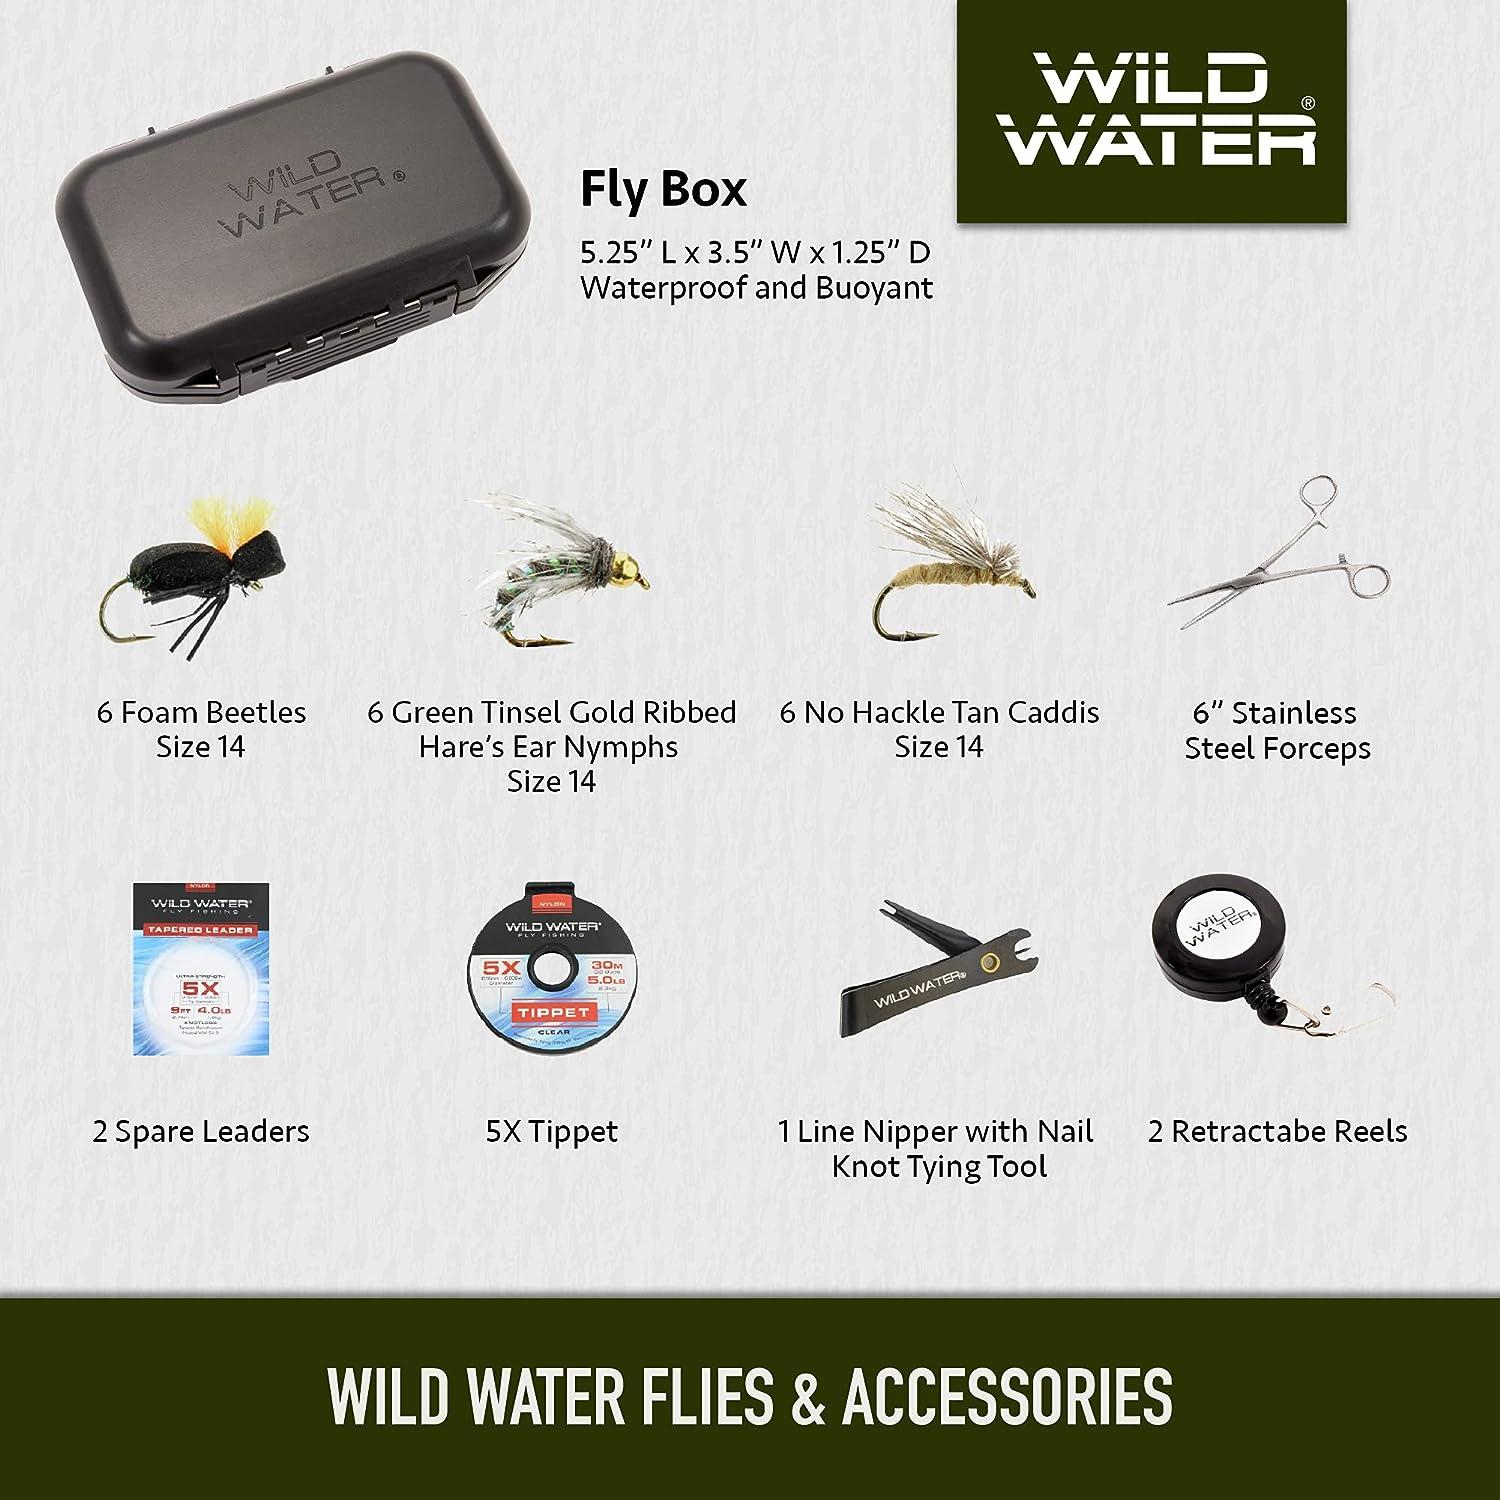 Wild Water Standard Fly Fishing Combo Starter Kit, 5 Foot 6 Inch Graphite  Rod, 3-Weight, 4-Piece Fly Rod Kit, Includes Die Cast Aluminum Reel, Fly